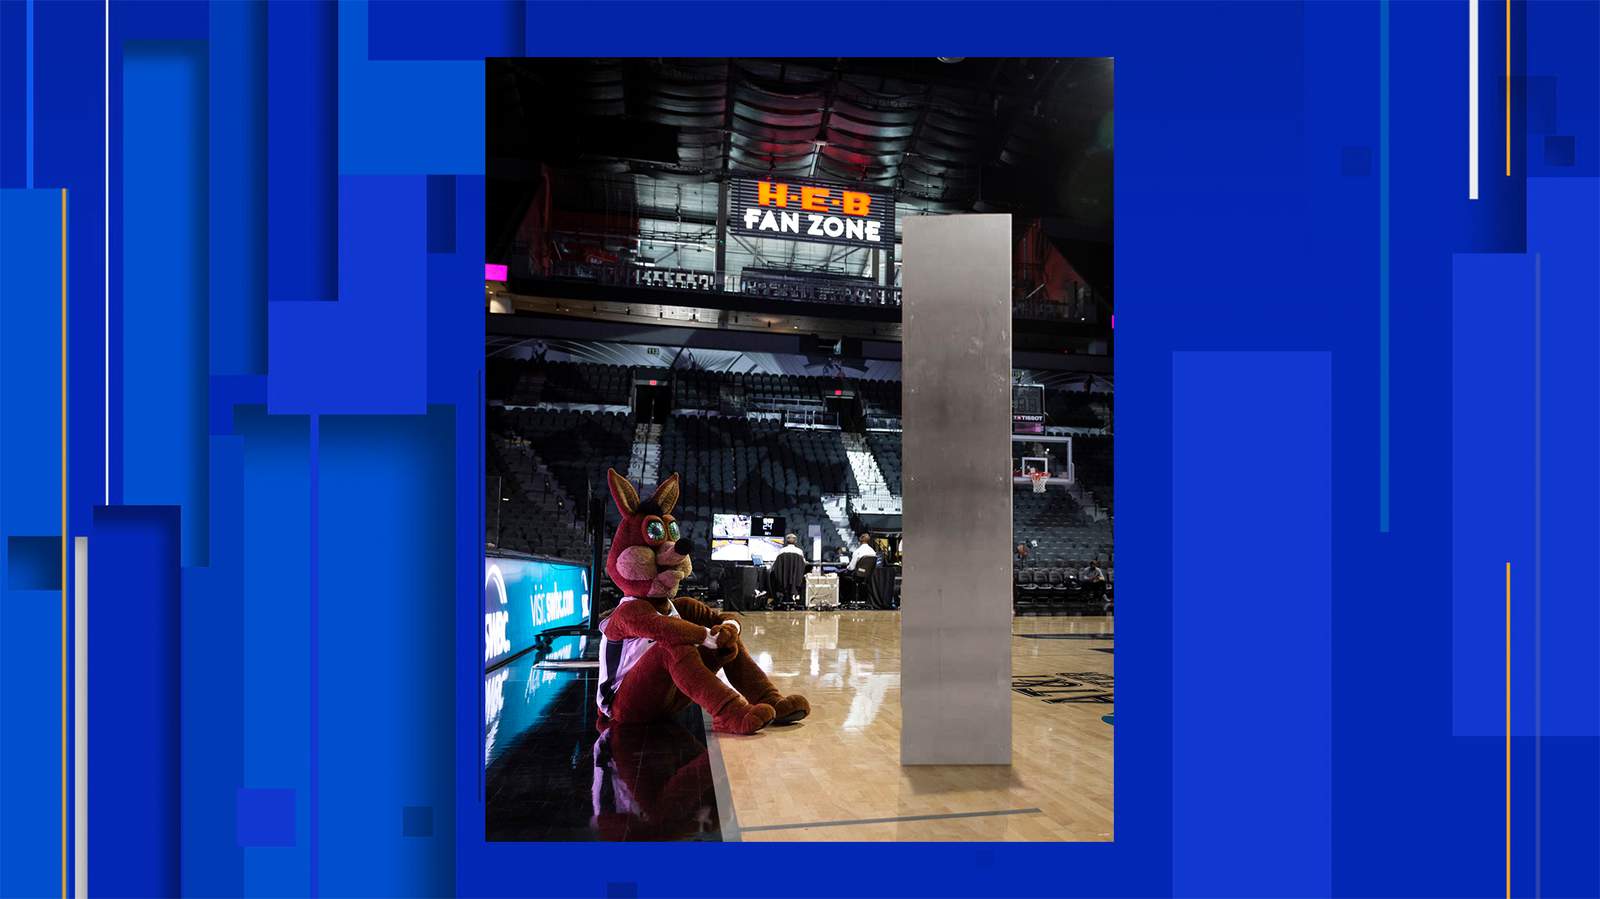 It’s a Spur, it’s a plane... it’s a monolith at the AT&T Center?